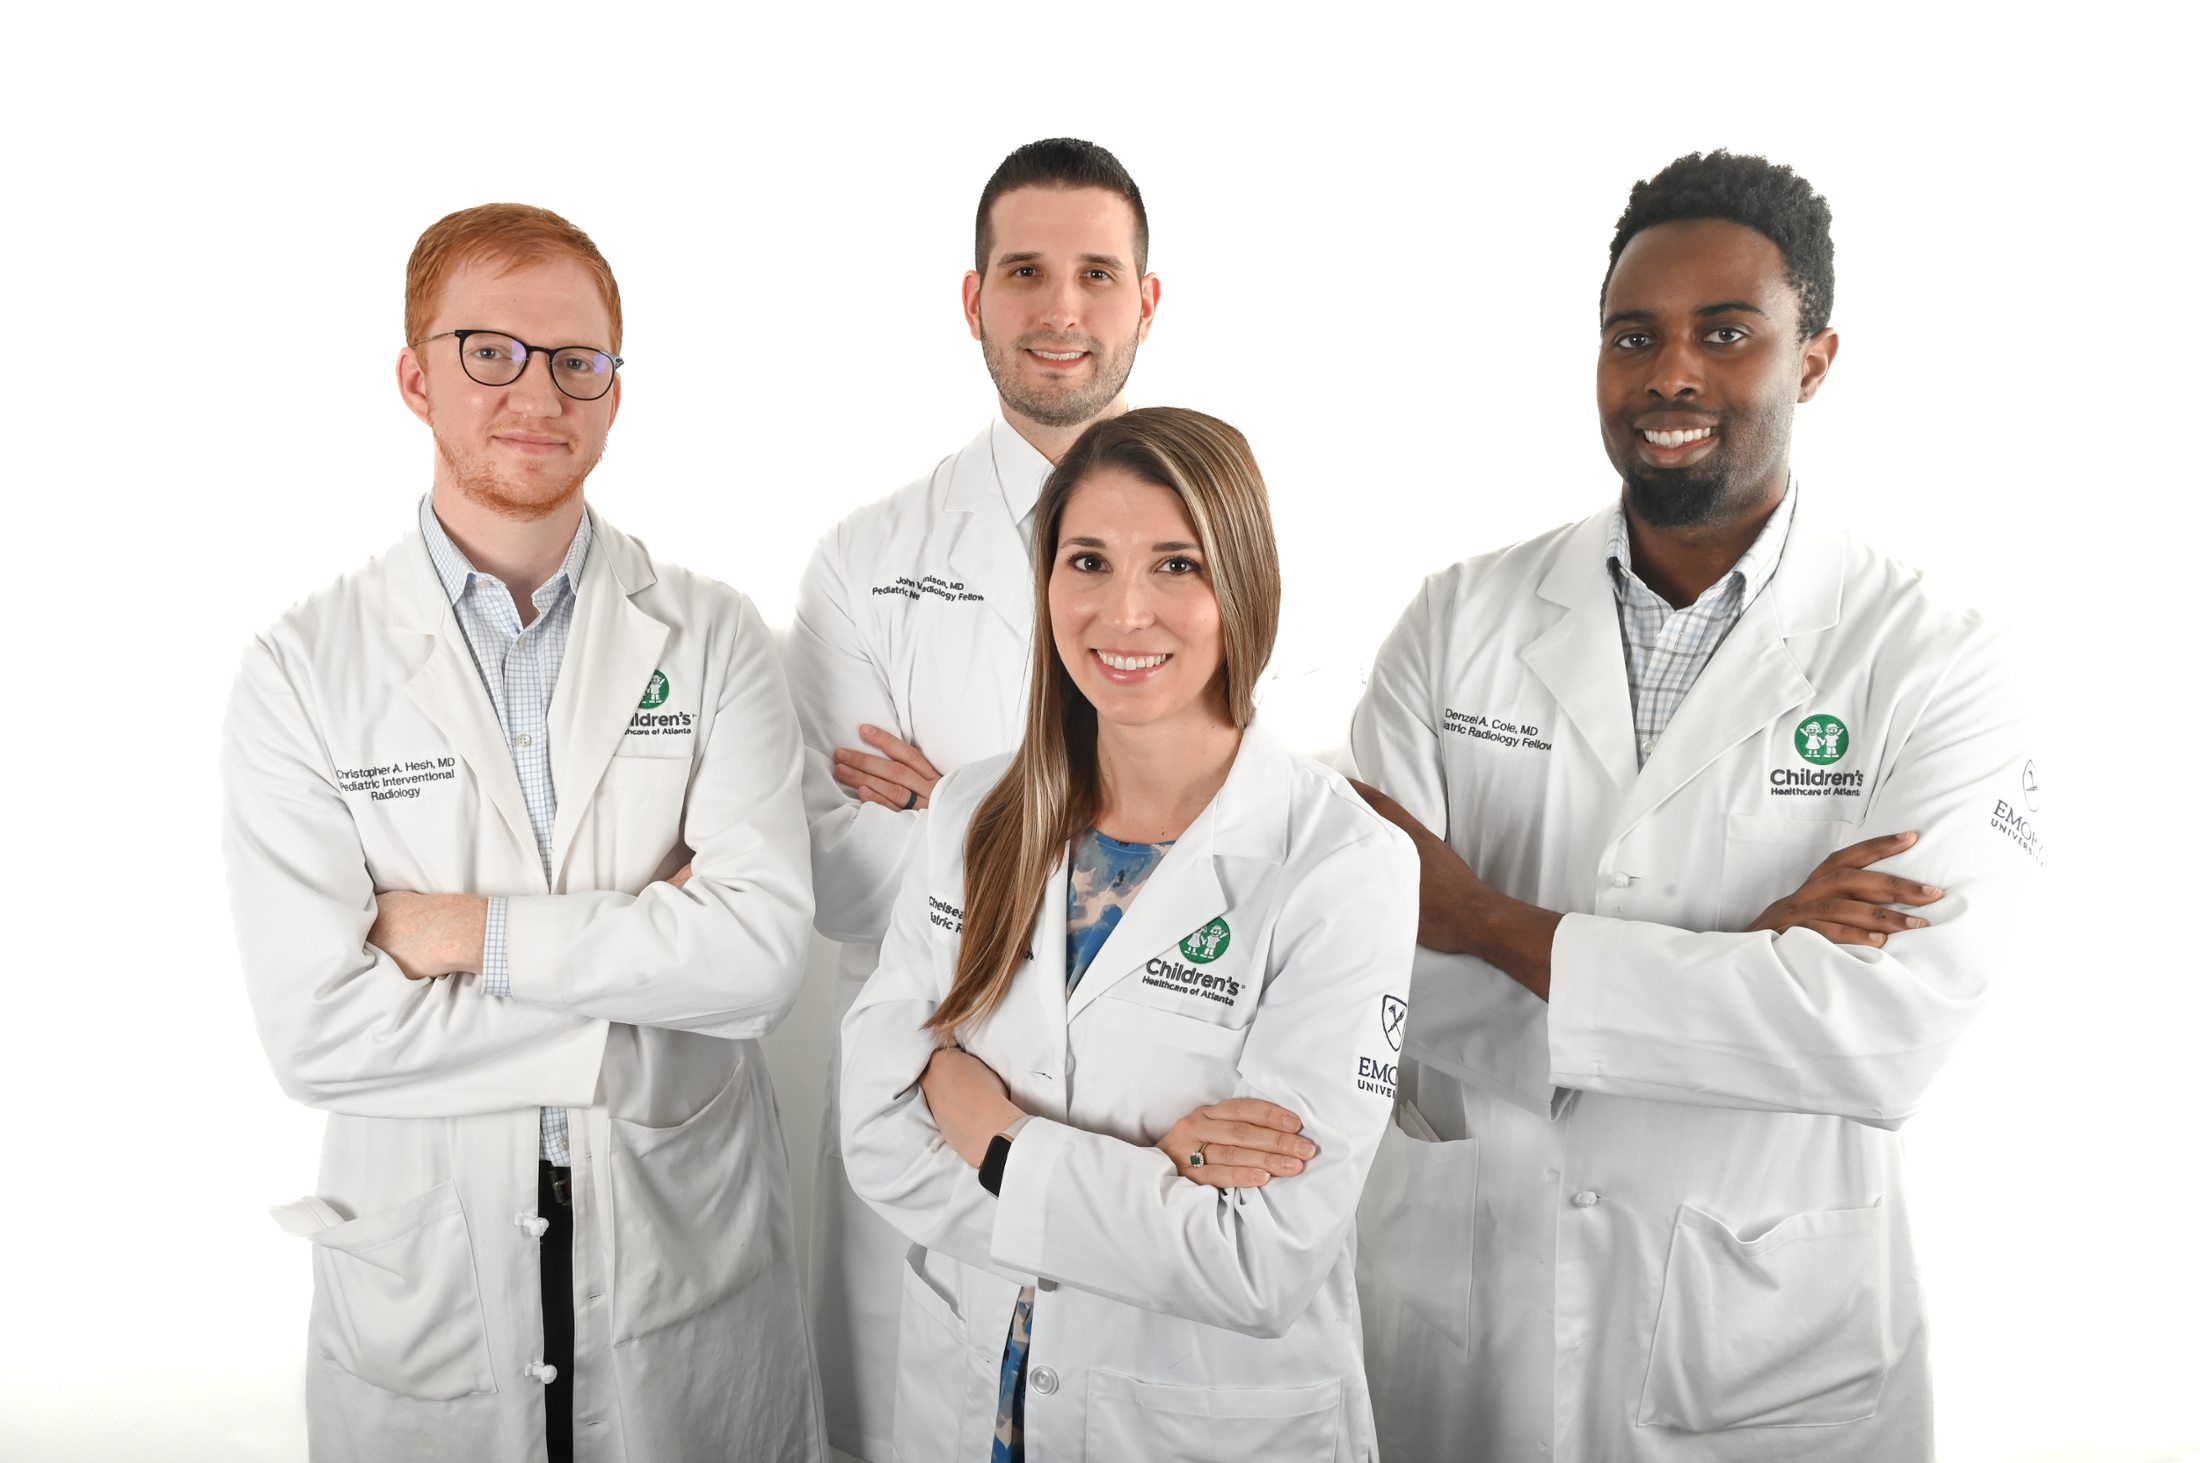 four people wearing white doctor coats and smiling with arms crossed